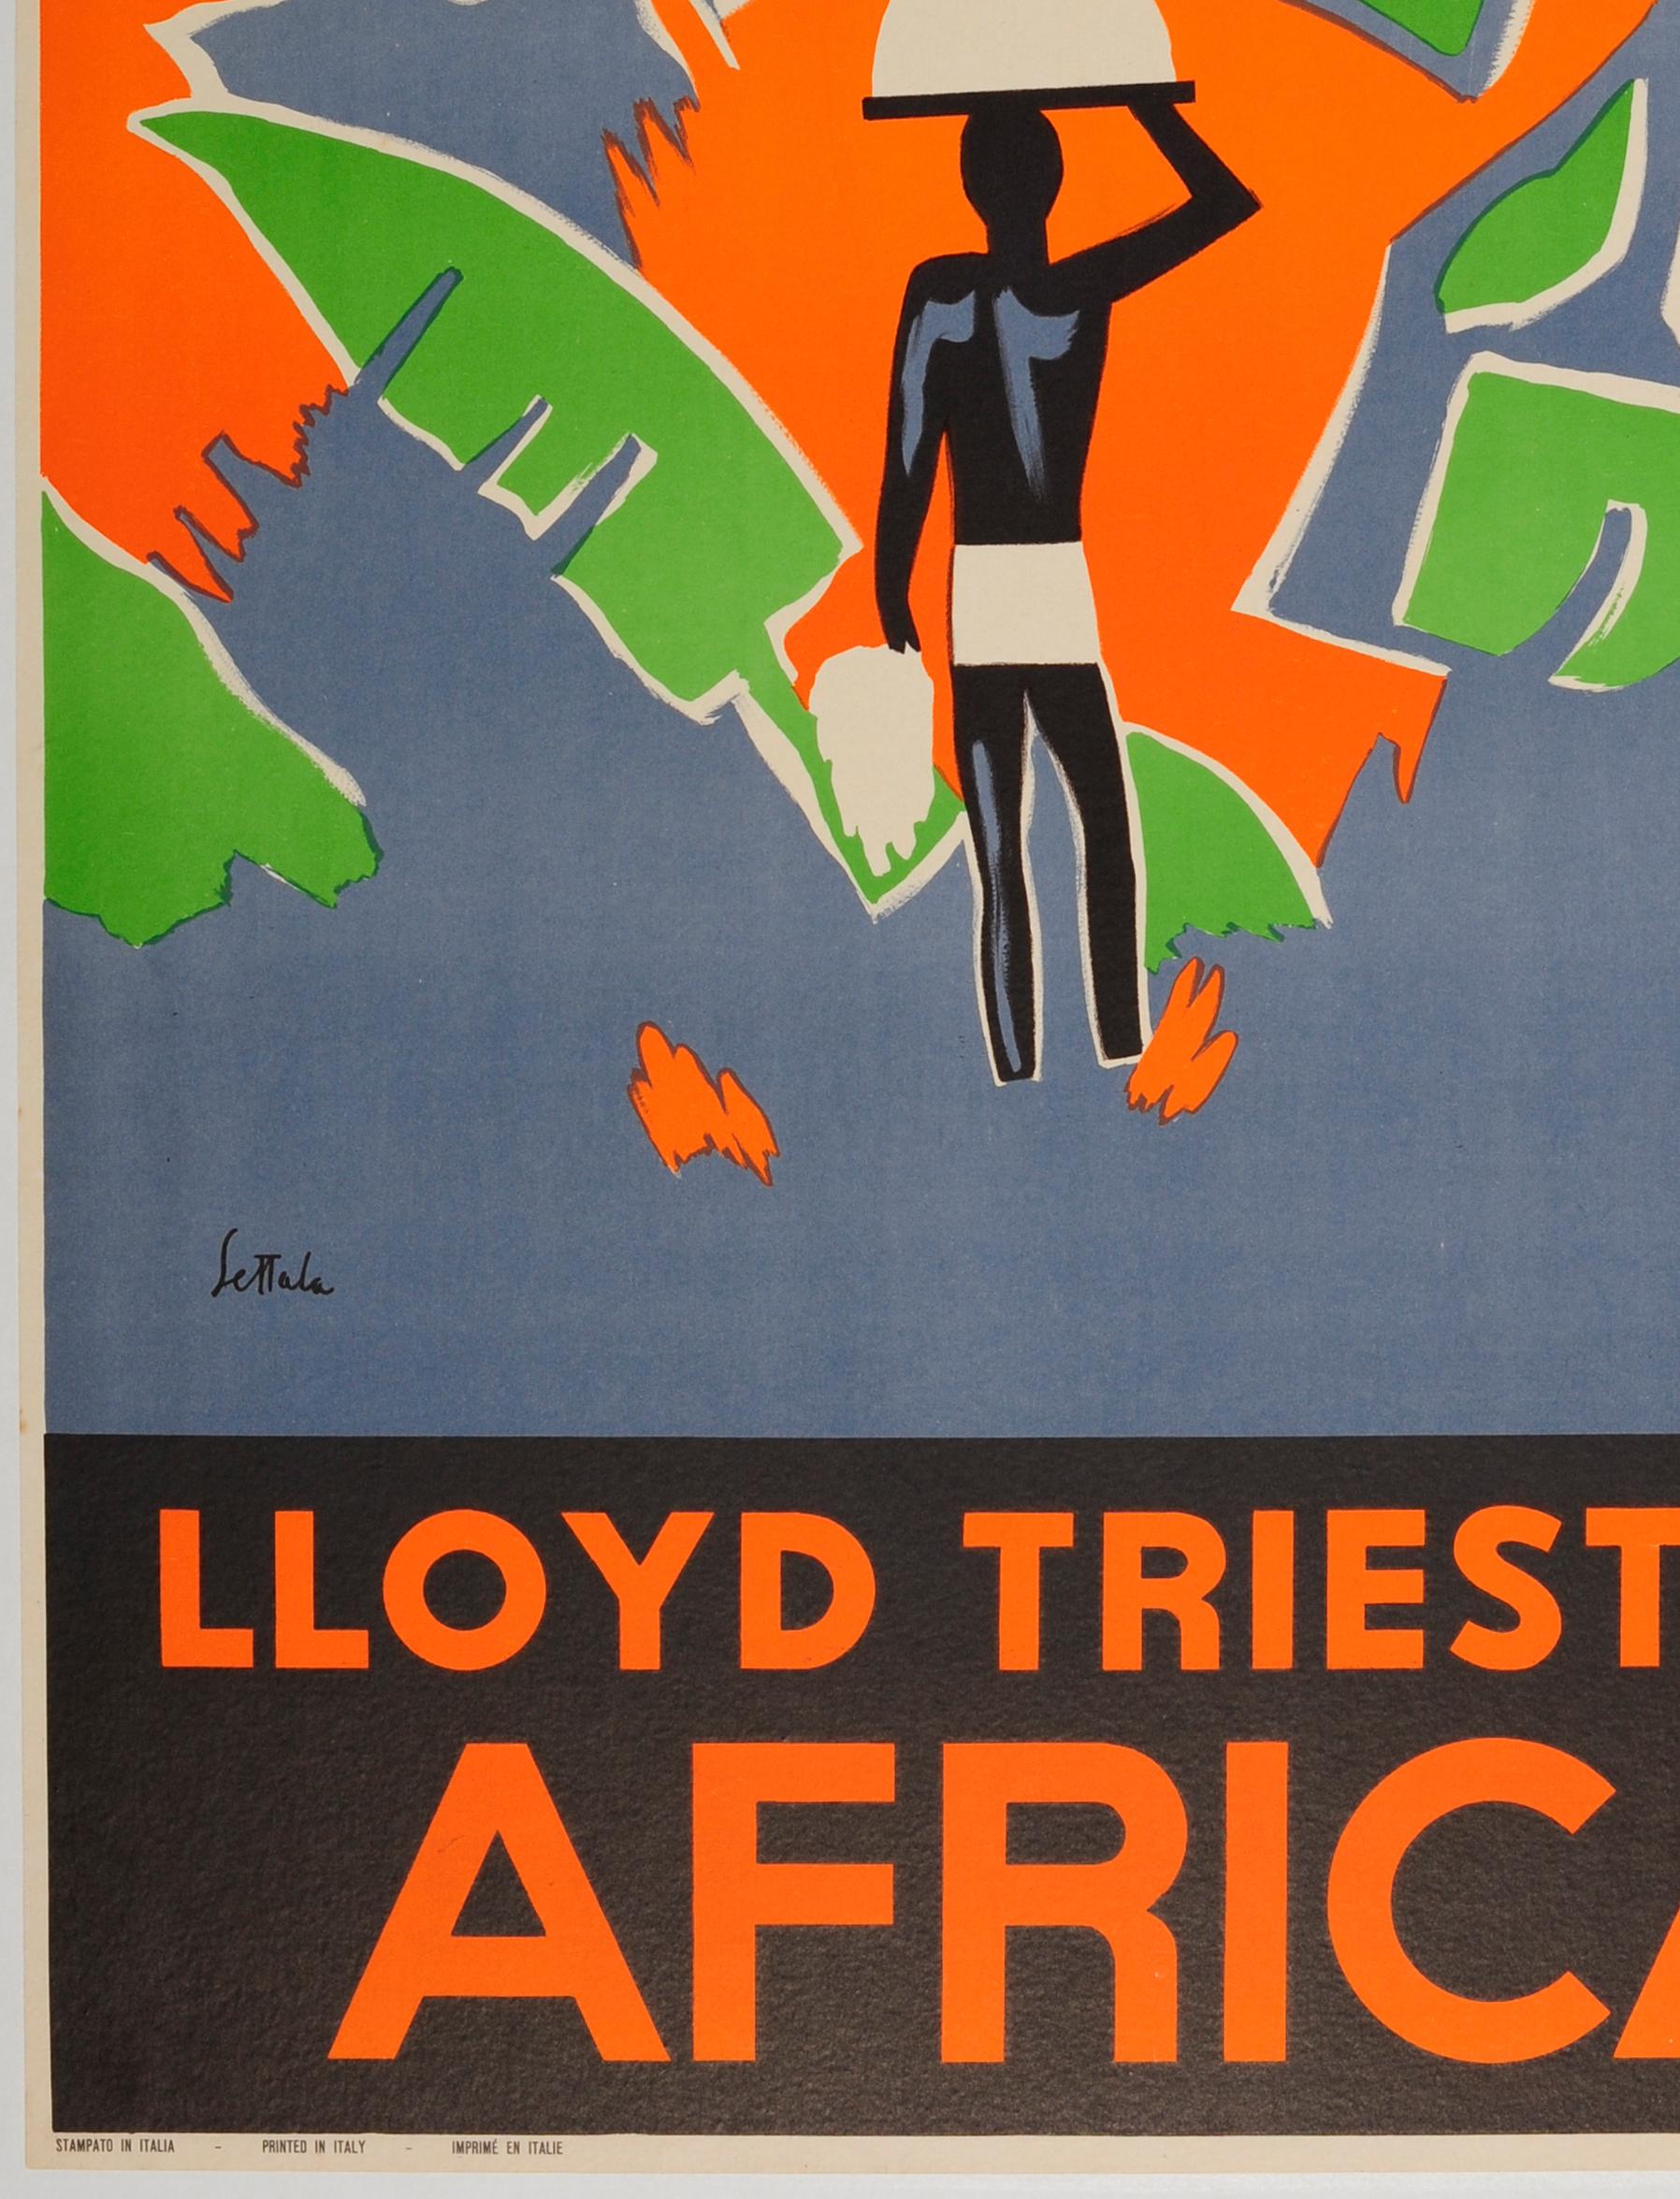 Original vintage travel advertising poster for the Italian shipping company Lloyd Triestino promoting travel by cruise liner to Africa. Colorful illustration by Giorgio Settala featuring a person carrying goods into a jungle with the leaves and